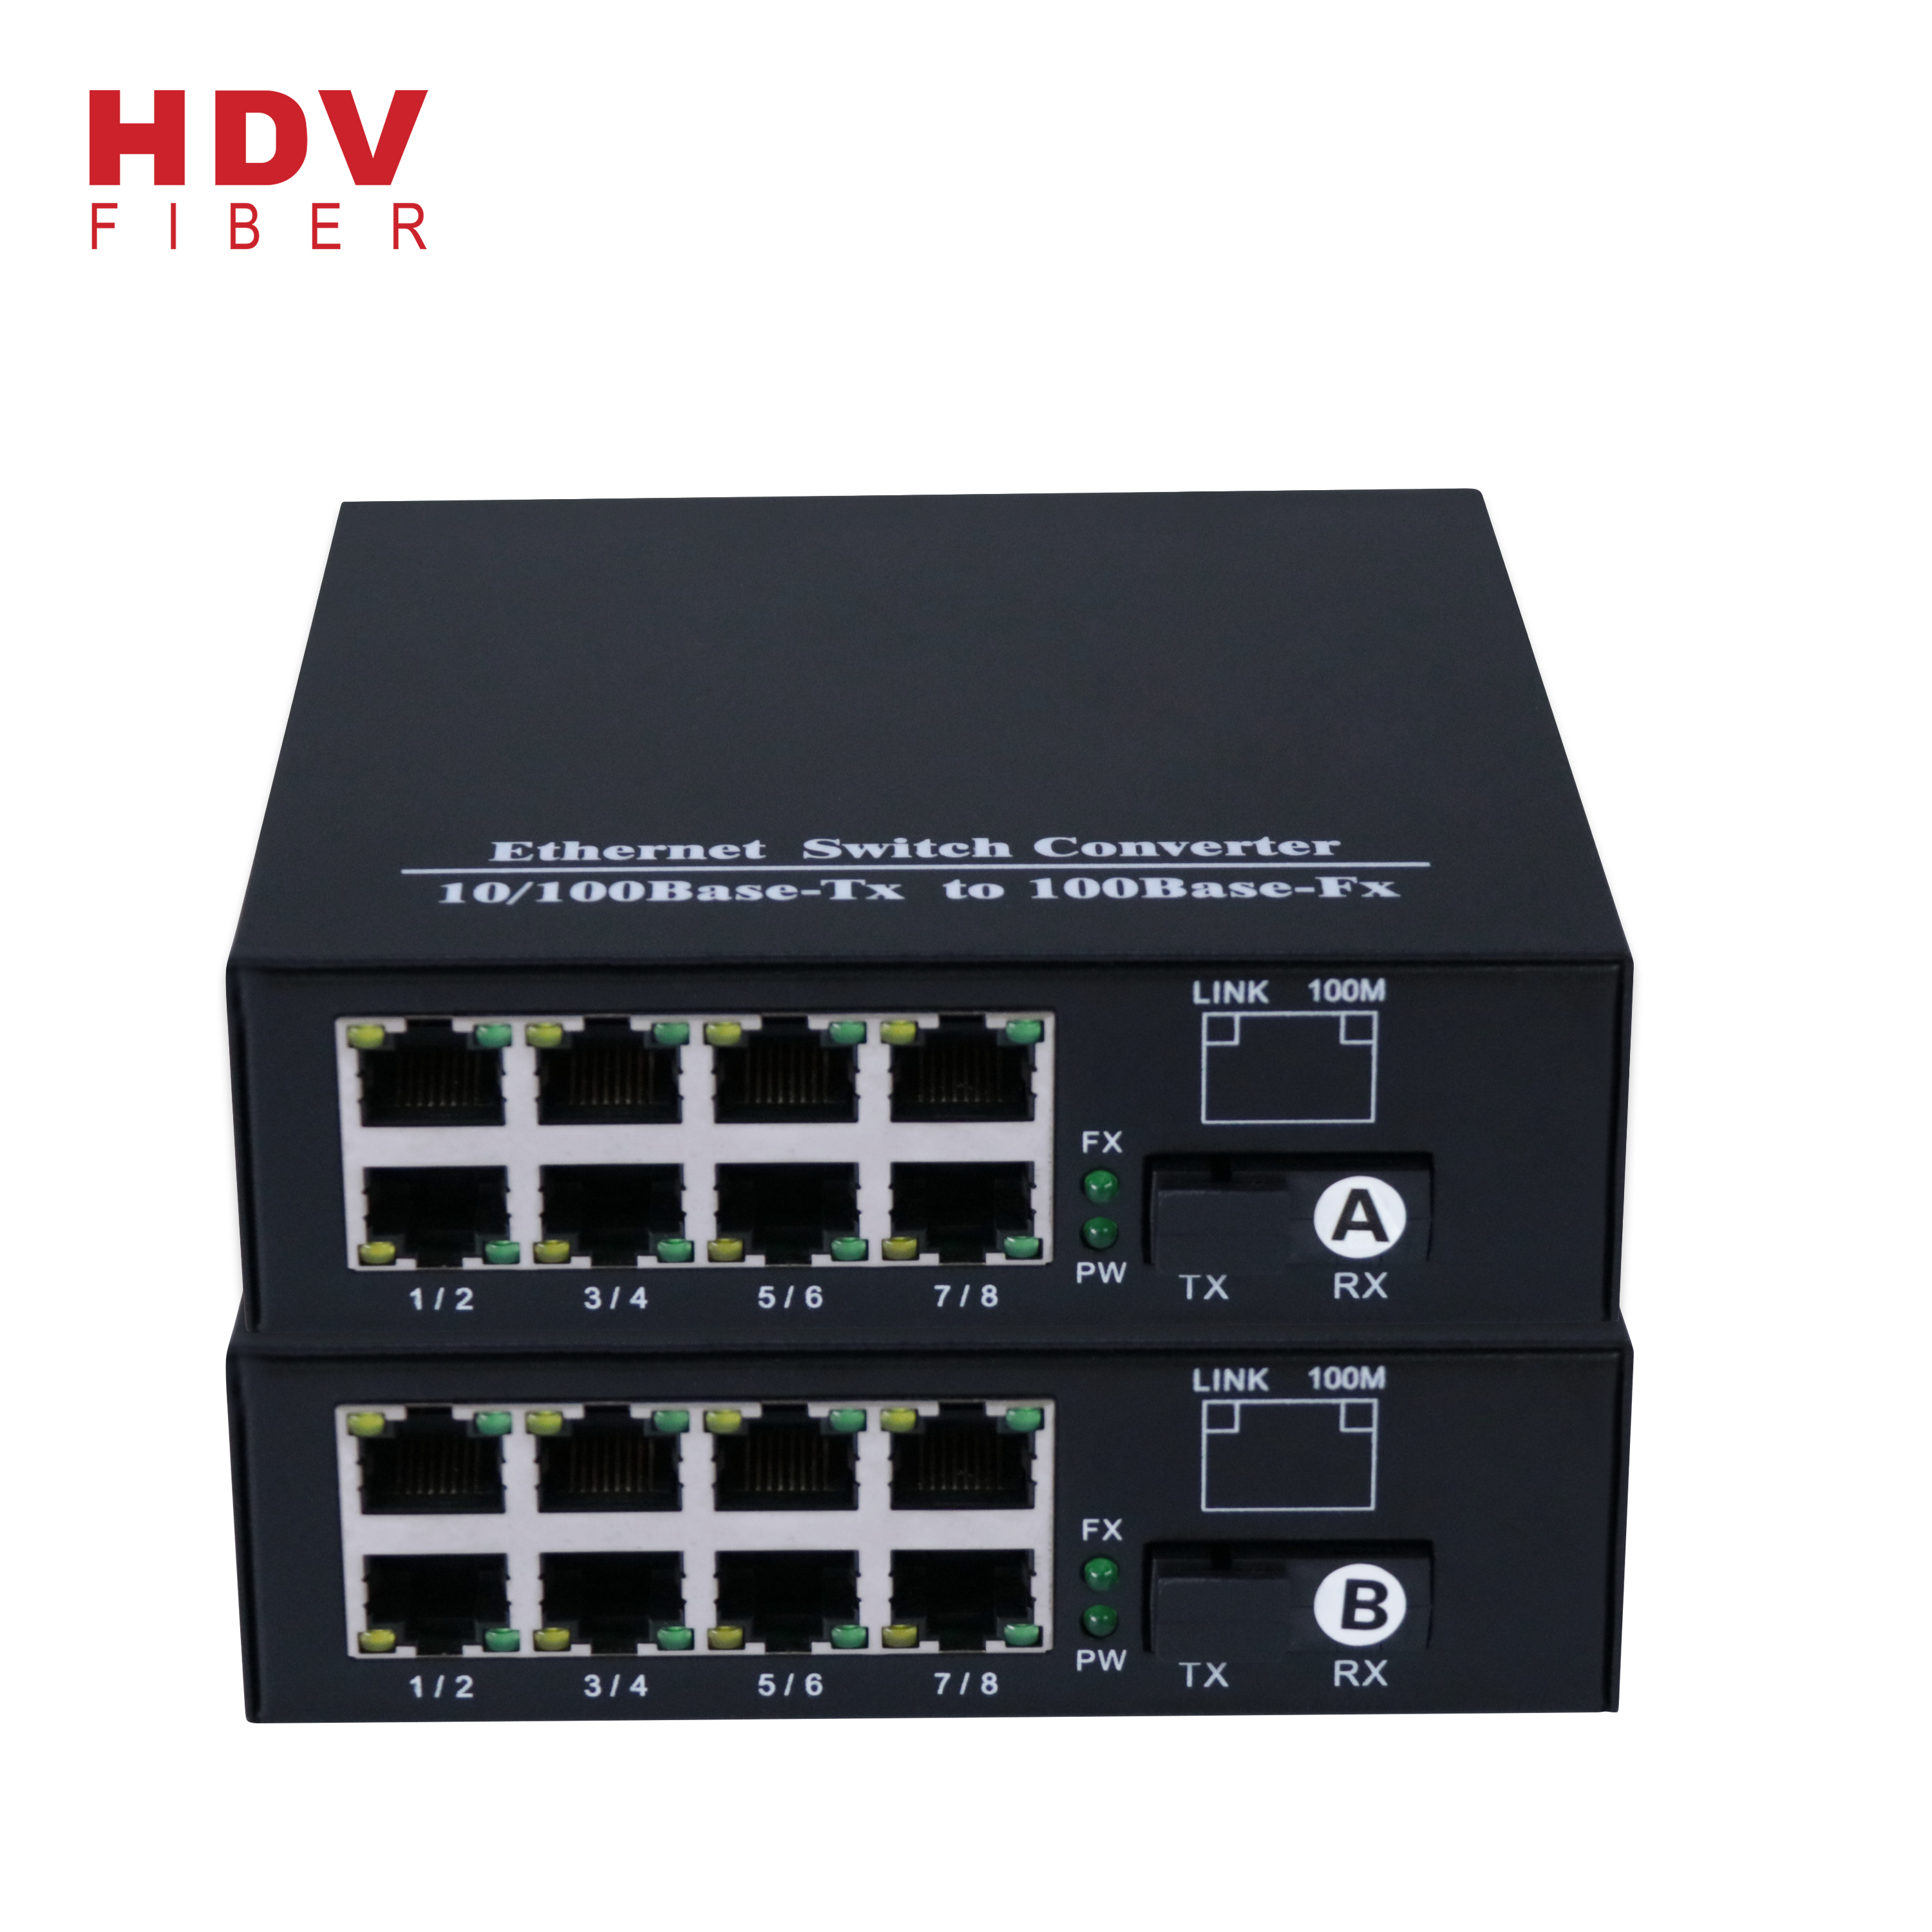 Hot New Products Managed Switches - Fast 8 port ethernet switch 10 / 100 Mbps network switch Compatible cisco – HDV